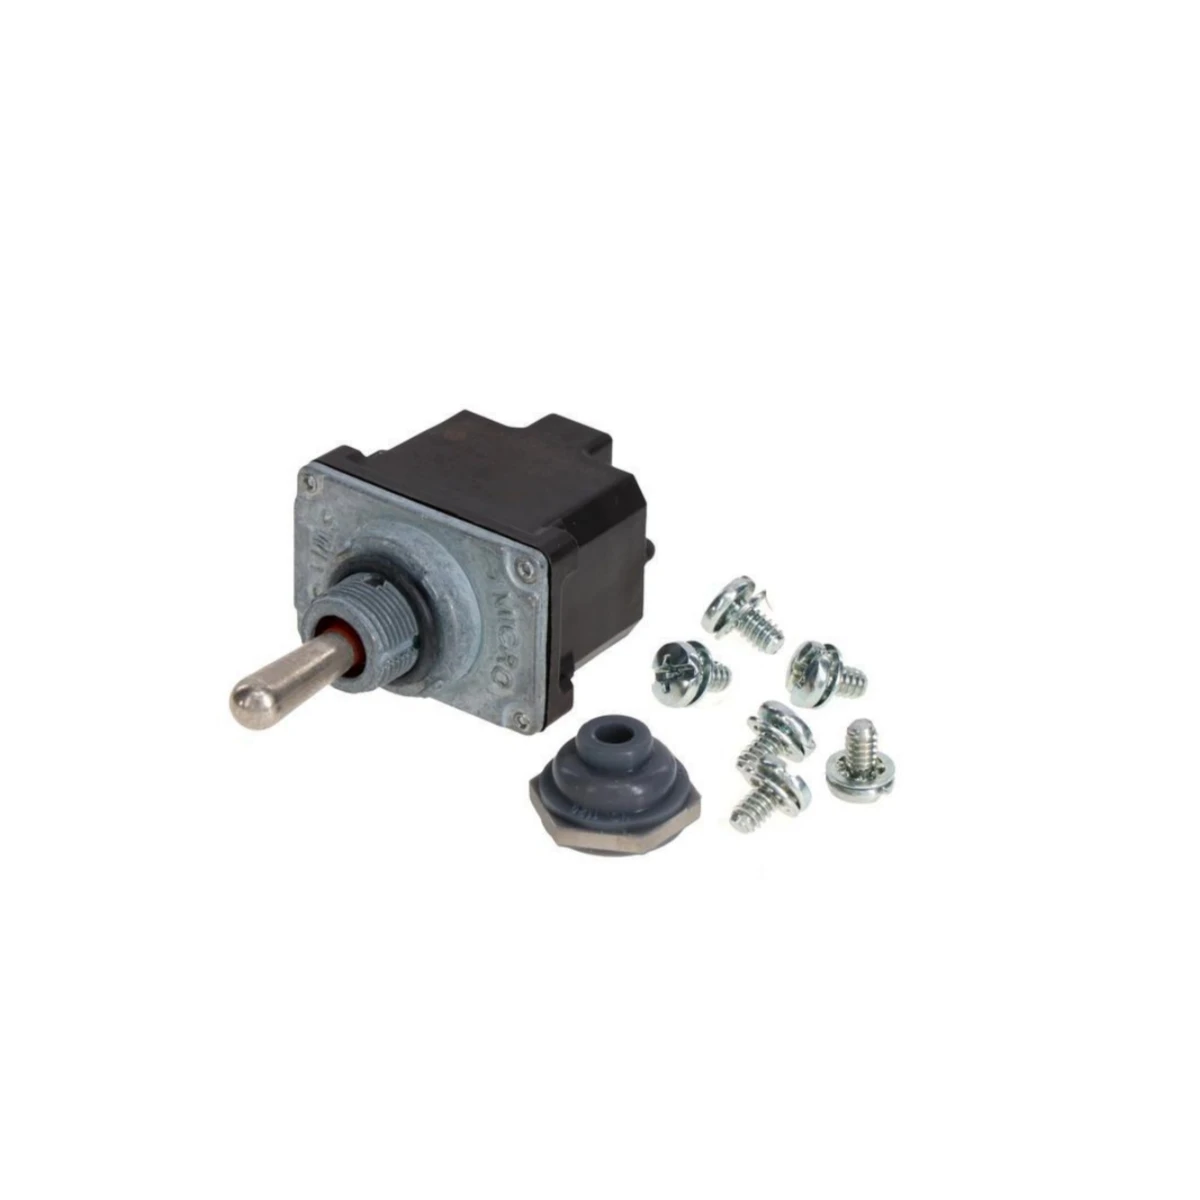 

HNARL Toggle Switch,128202GT NEW Toggle Switch Used for HAULOTTE and GENIE...